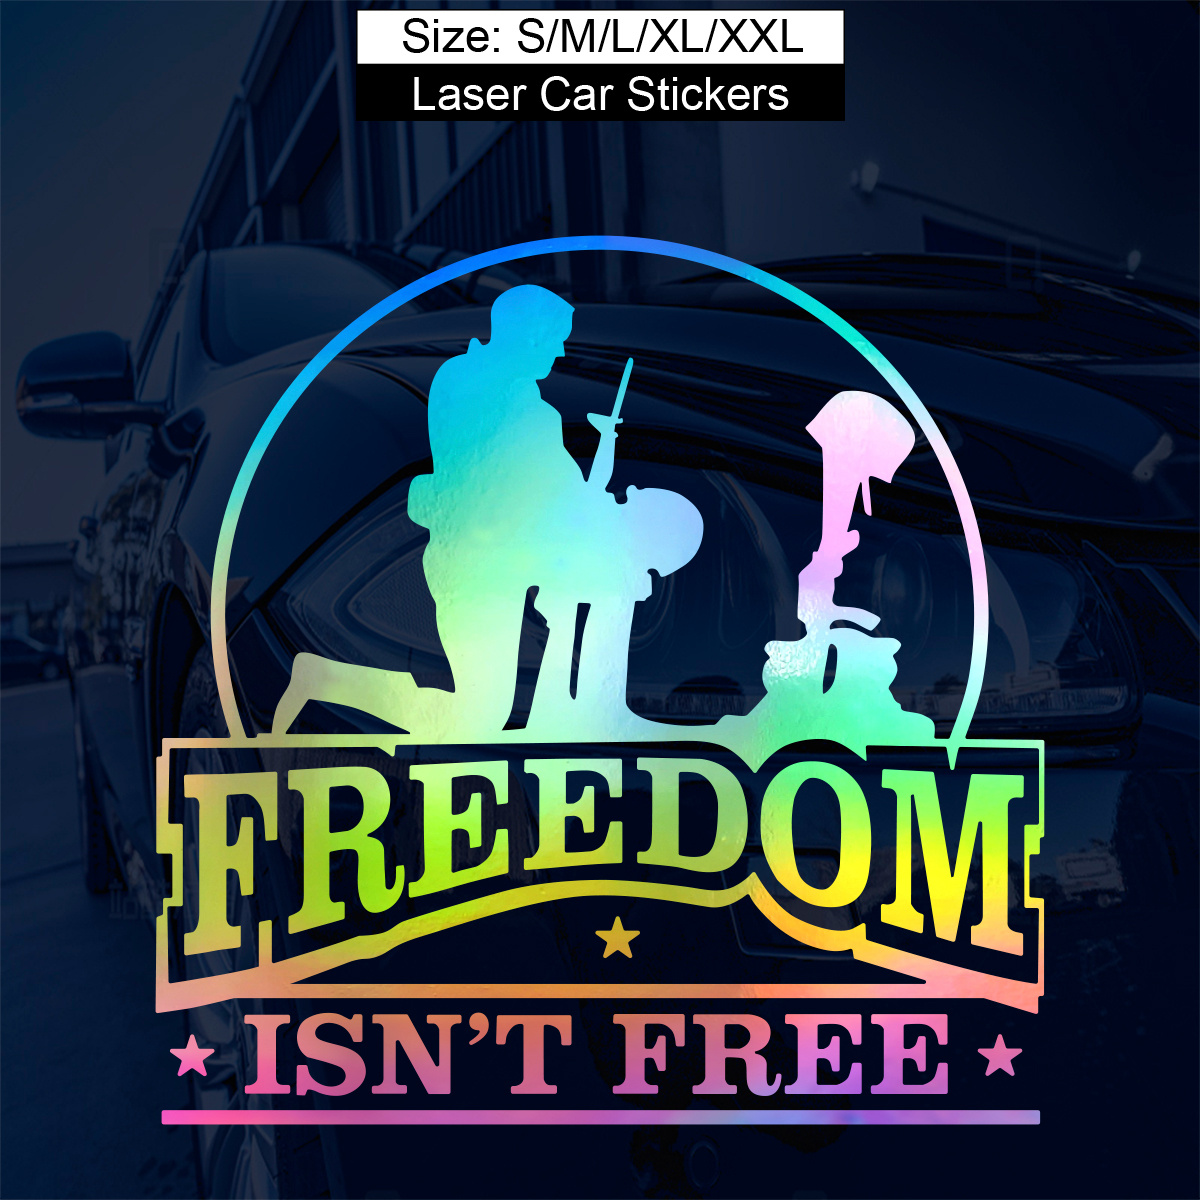 Freedom Isn't Free Soldier Decal Sticker